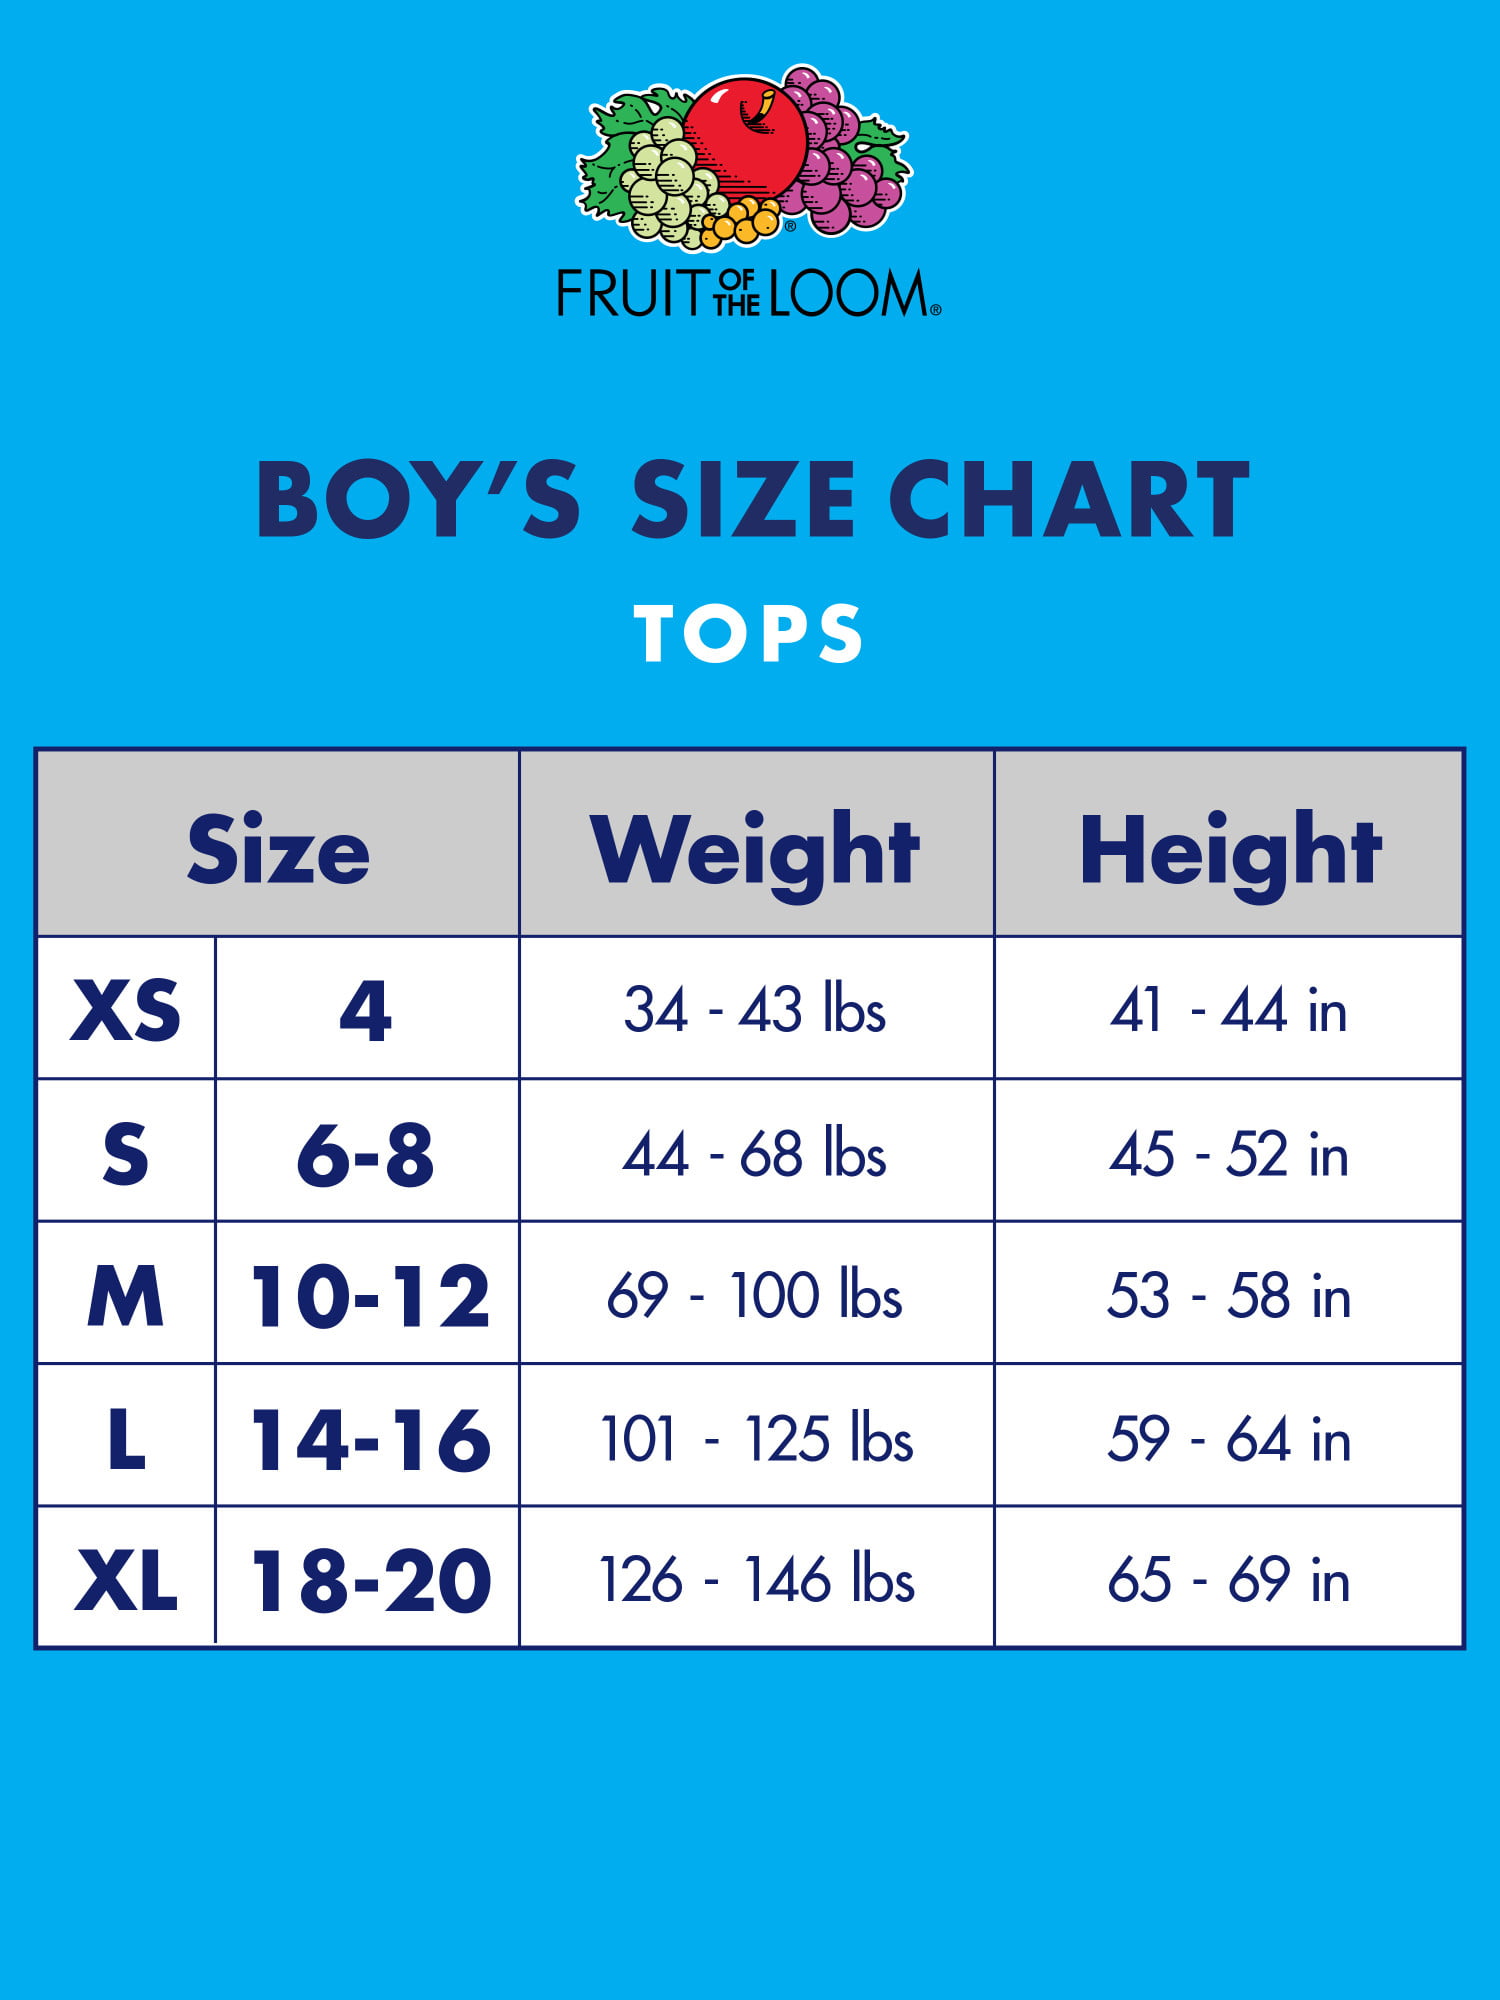 Fruit Of The Loom Youth Shirt Size Chart